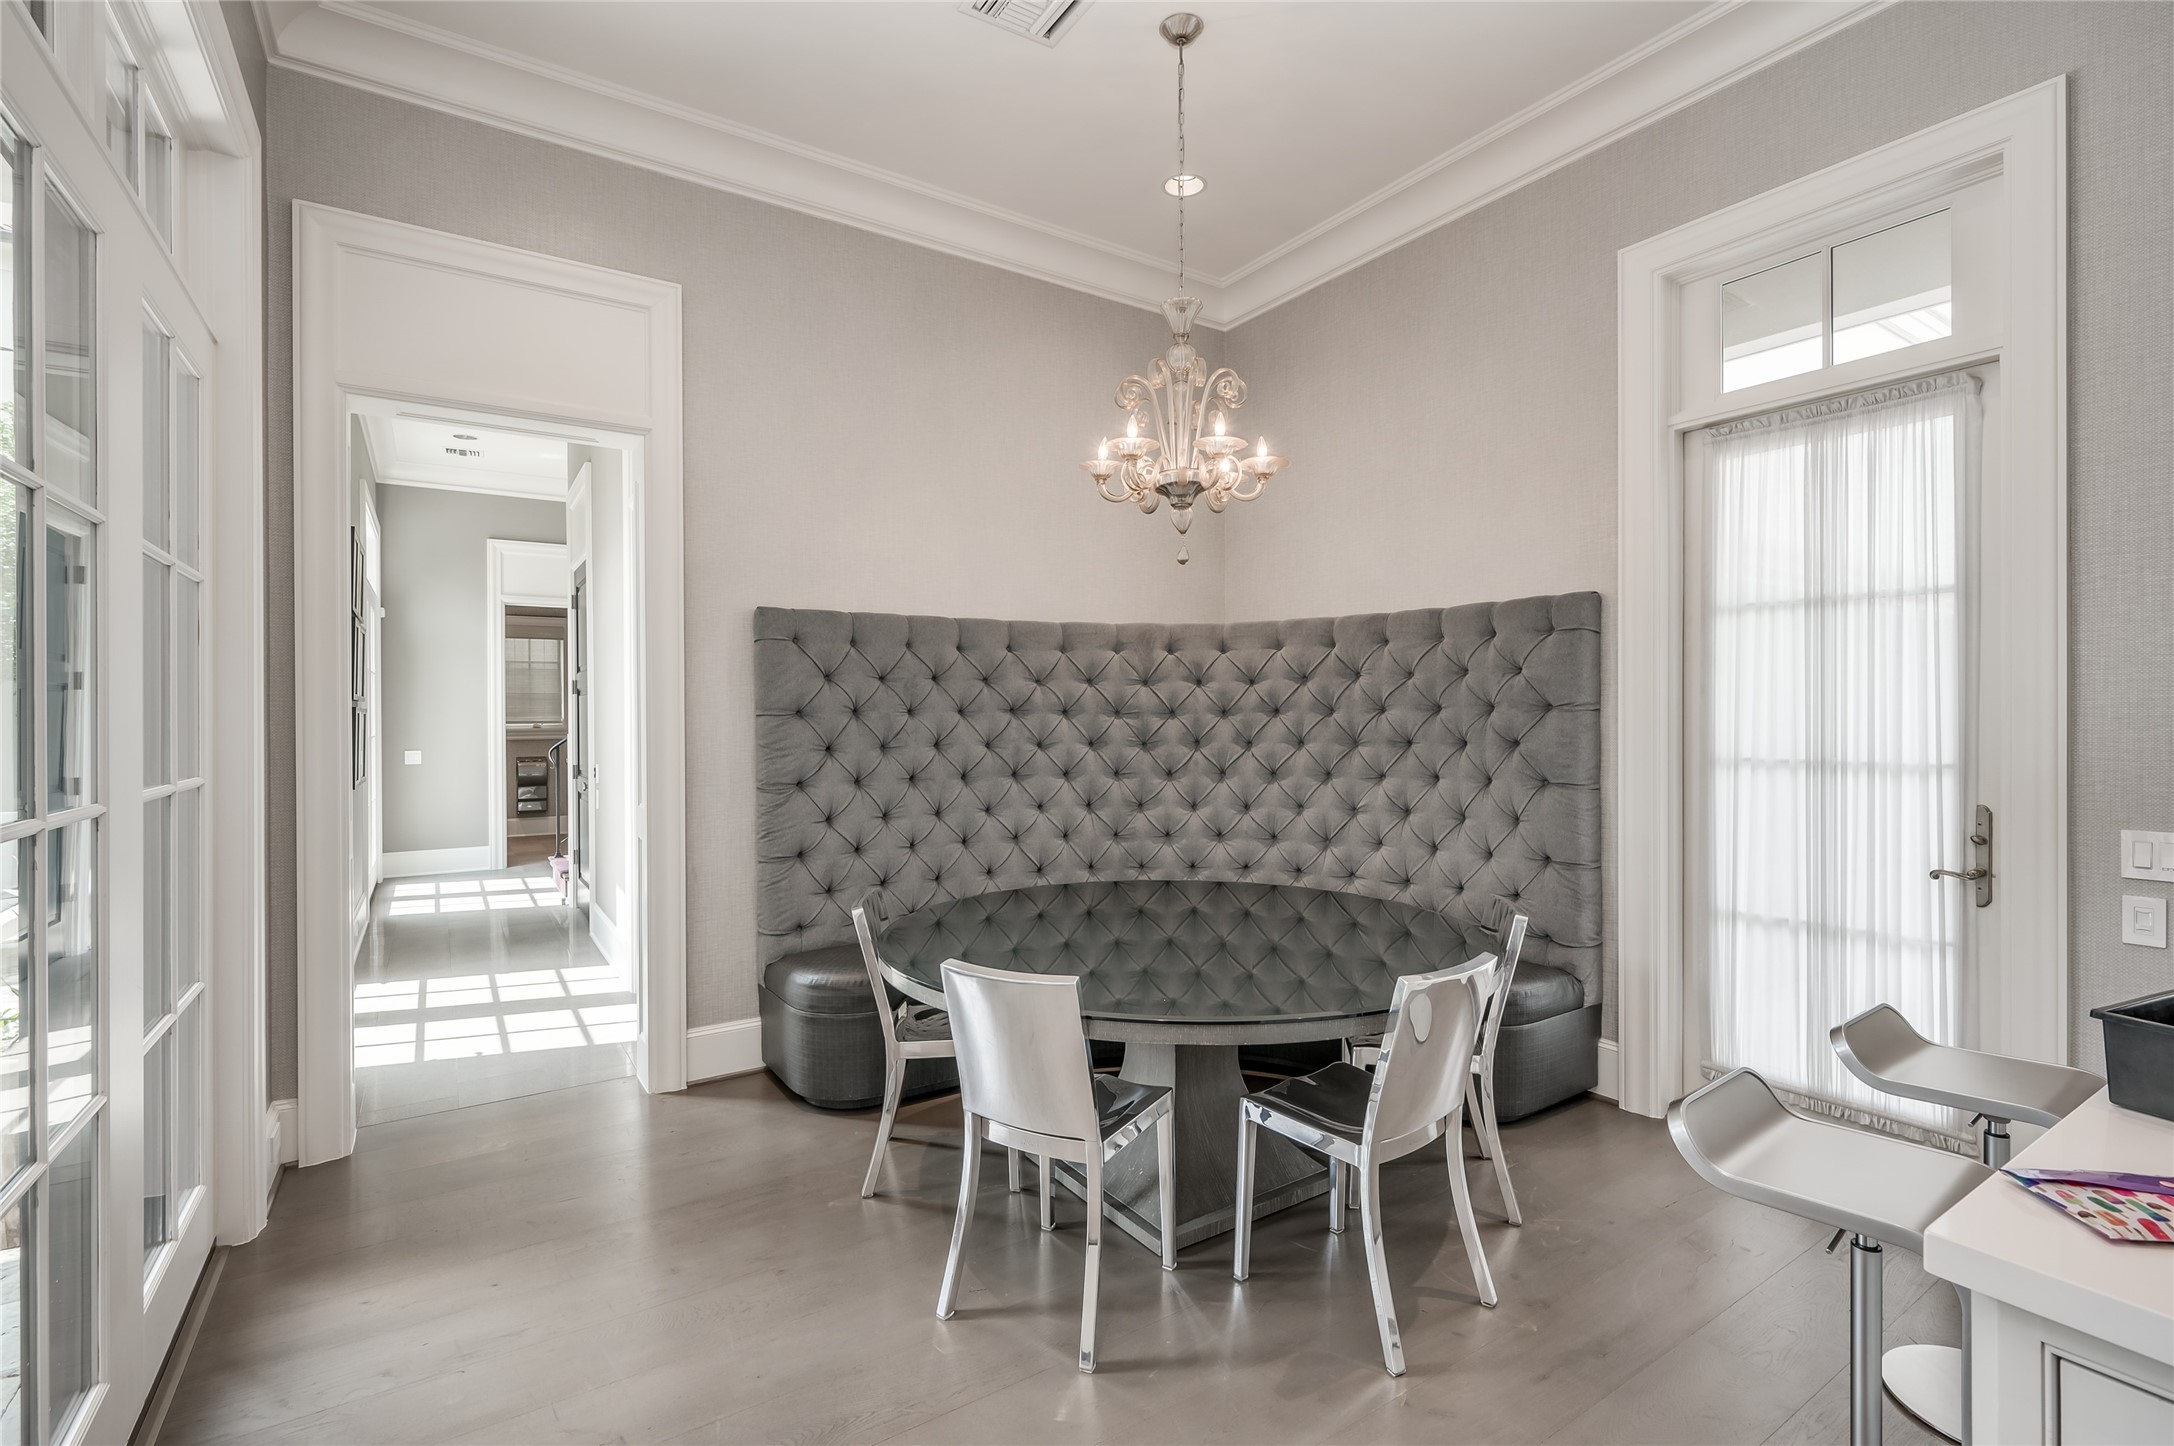 [Breakfast Room]
Open to the kitchen and family room, the breakfast area features a custom-designed upholstered banquette. Note service hall to return staircase, pool bath, and garage.